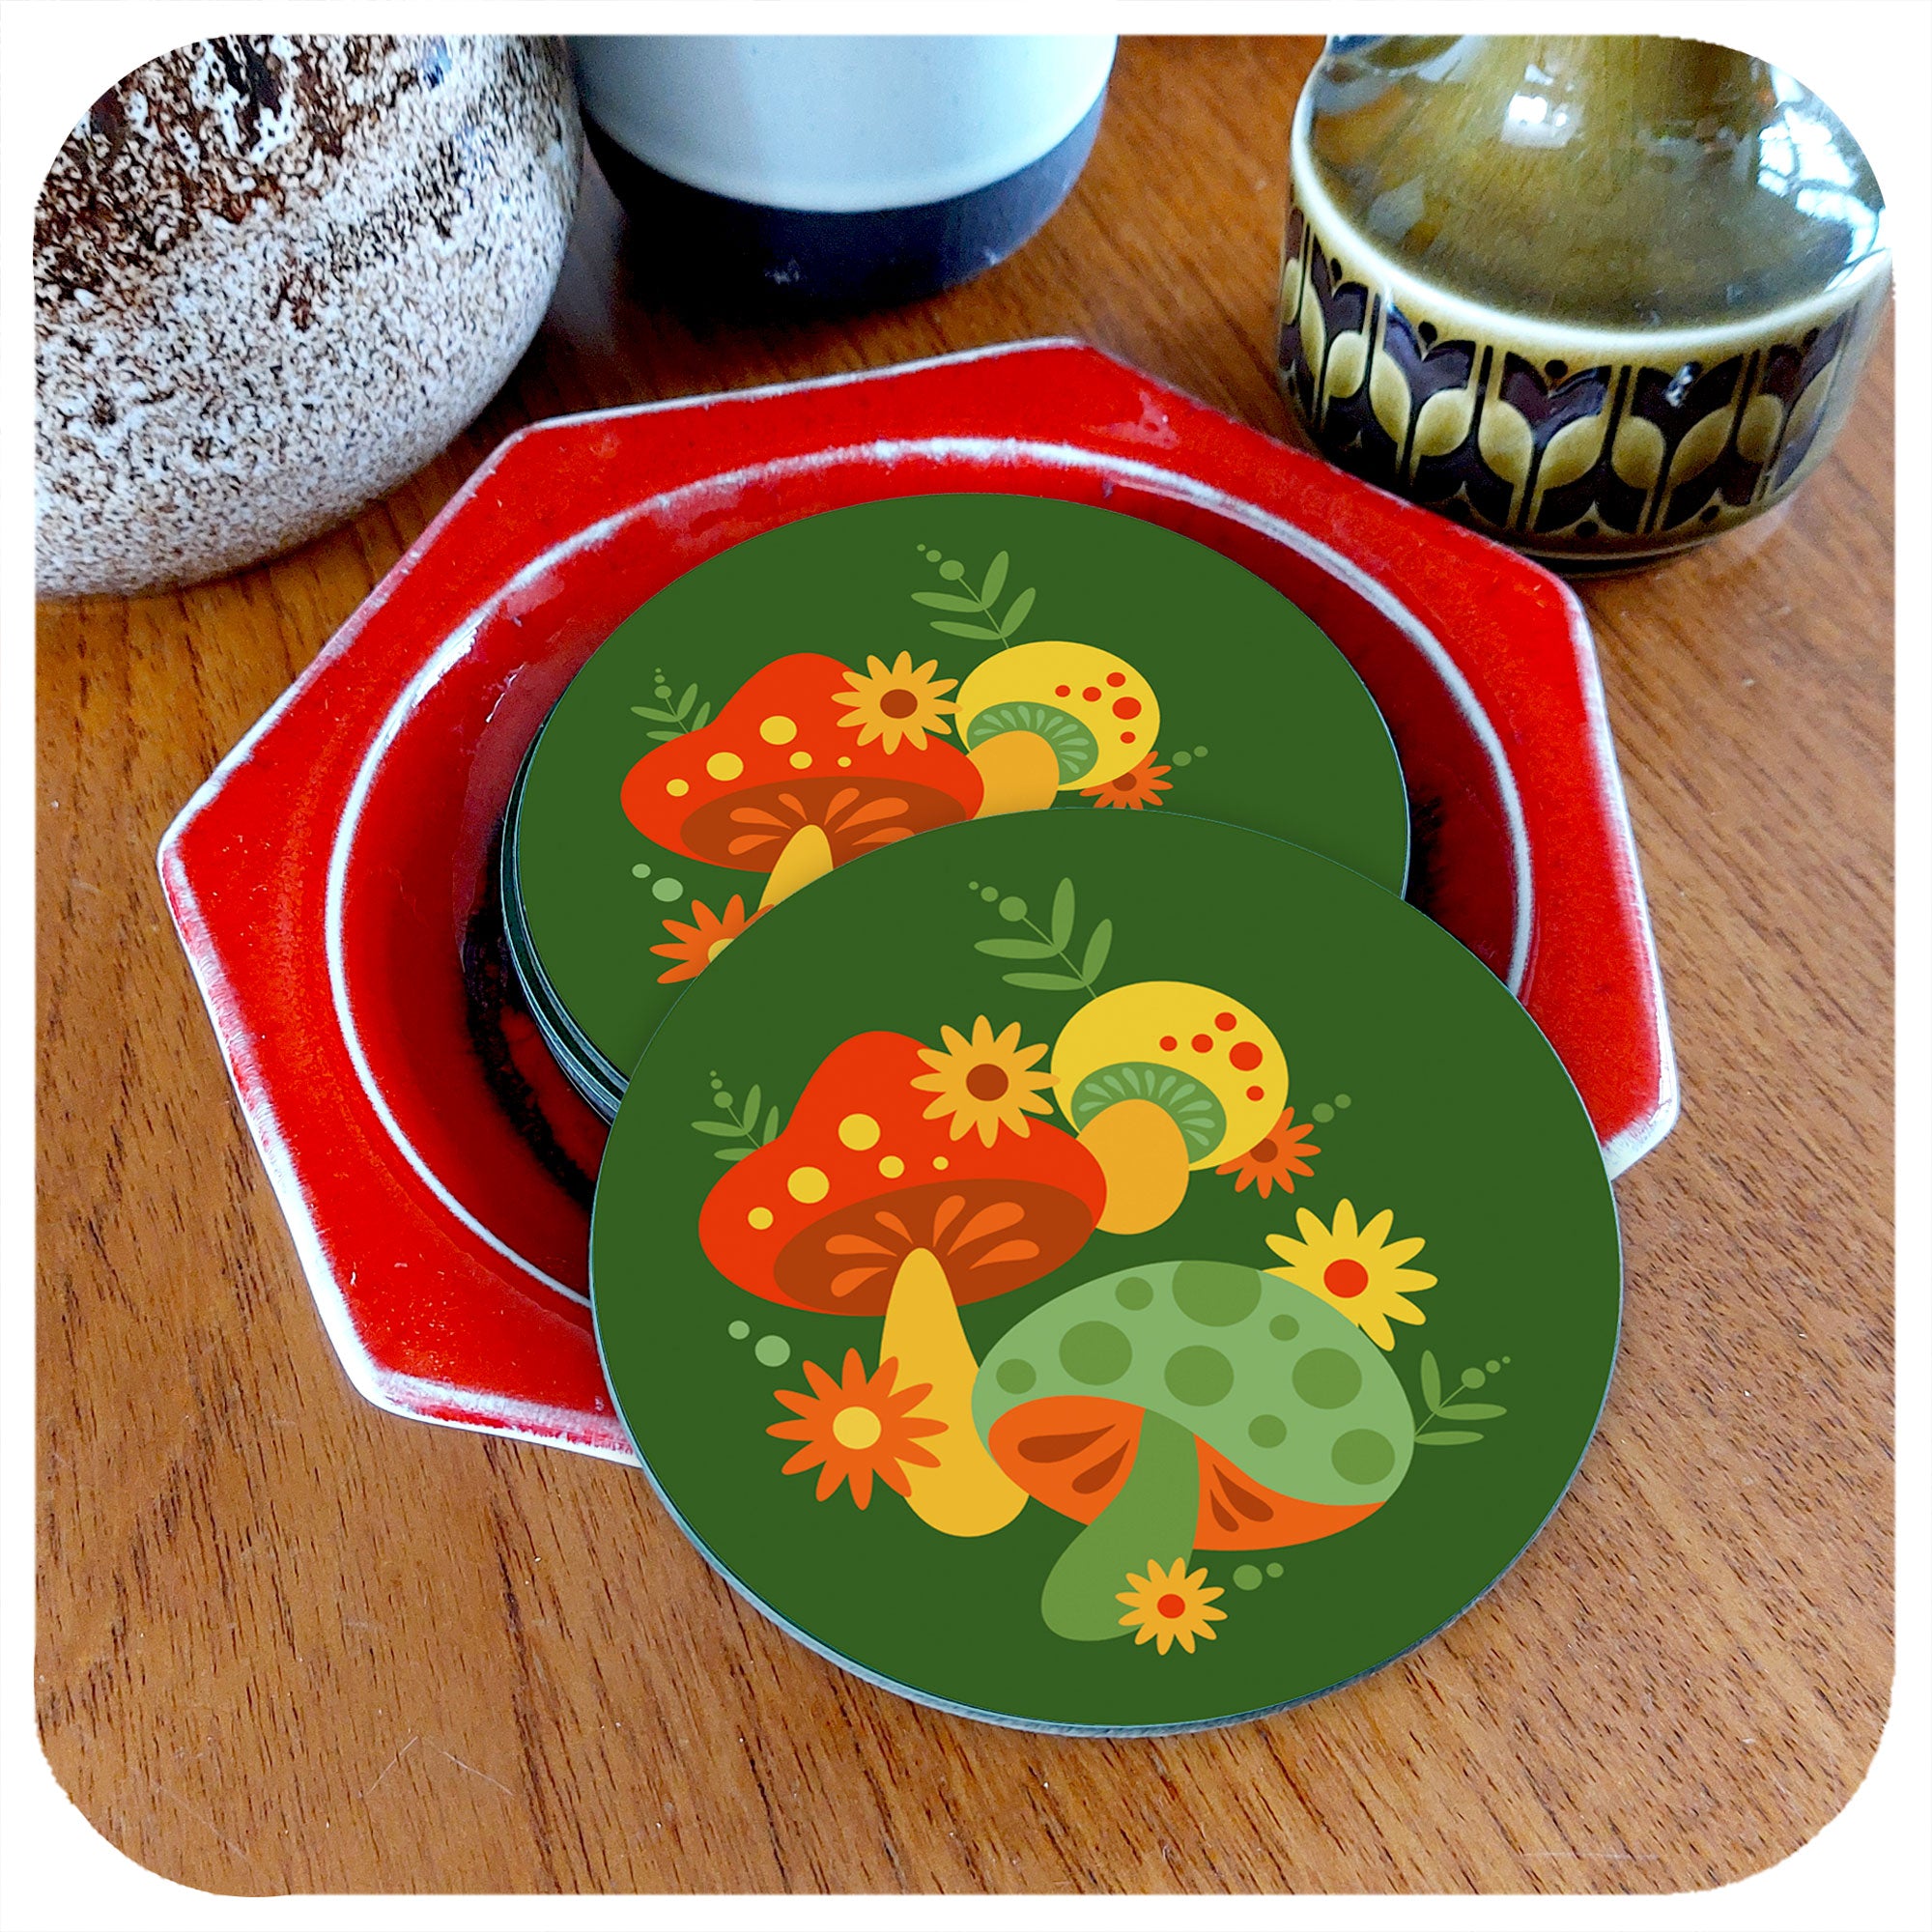 Round 70s style coasters featuring retro mushrooms sit in a Pool Pottery dish, on a teak table next to vintage pottery vases | The Inkabilly Emporium